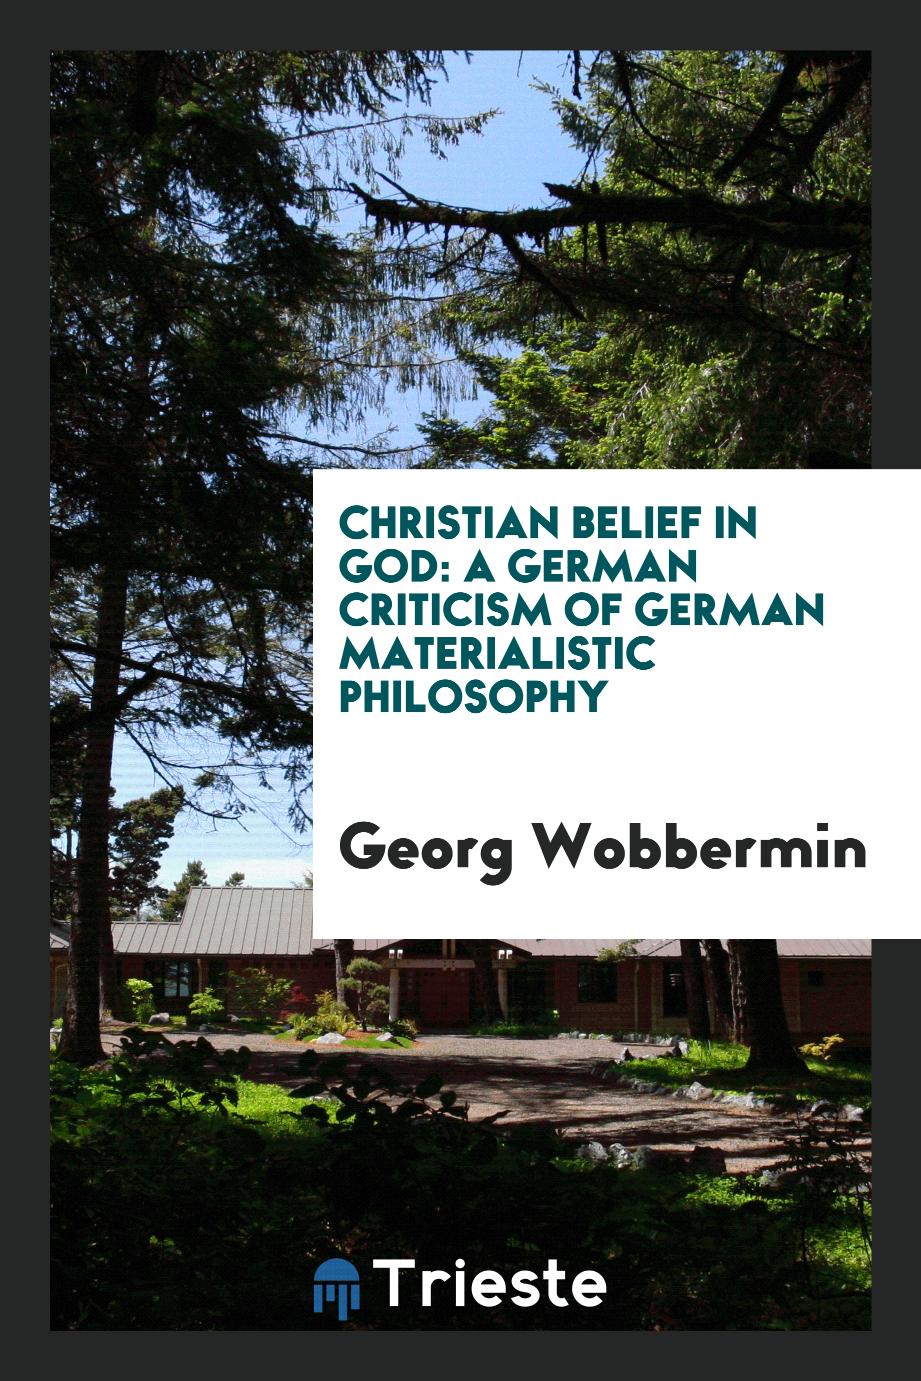 Christian belief in God: a German criticism of German materialistic philosophy